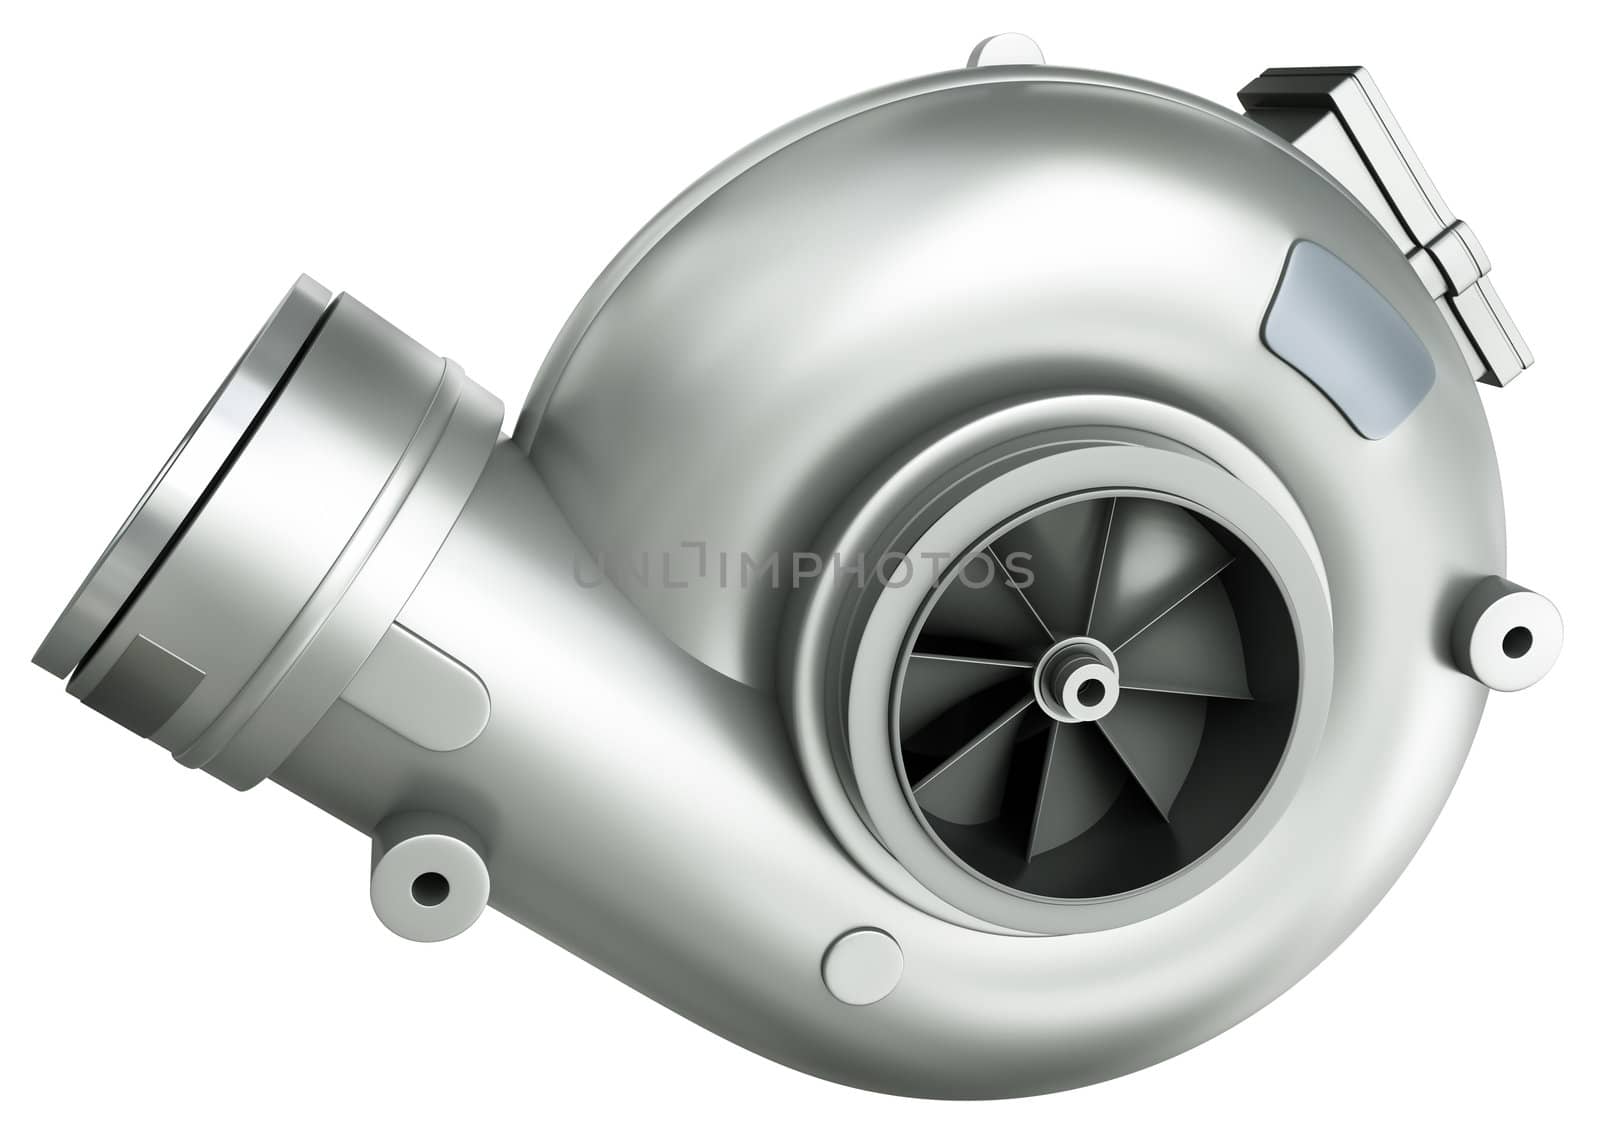 Automotive turbocharger, a device used for increasing engine power. 3D render.